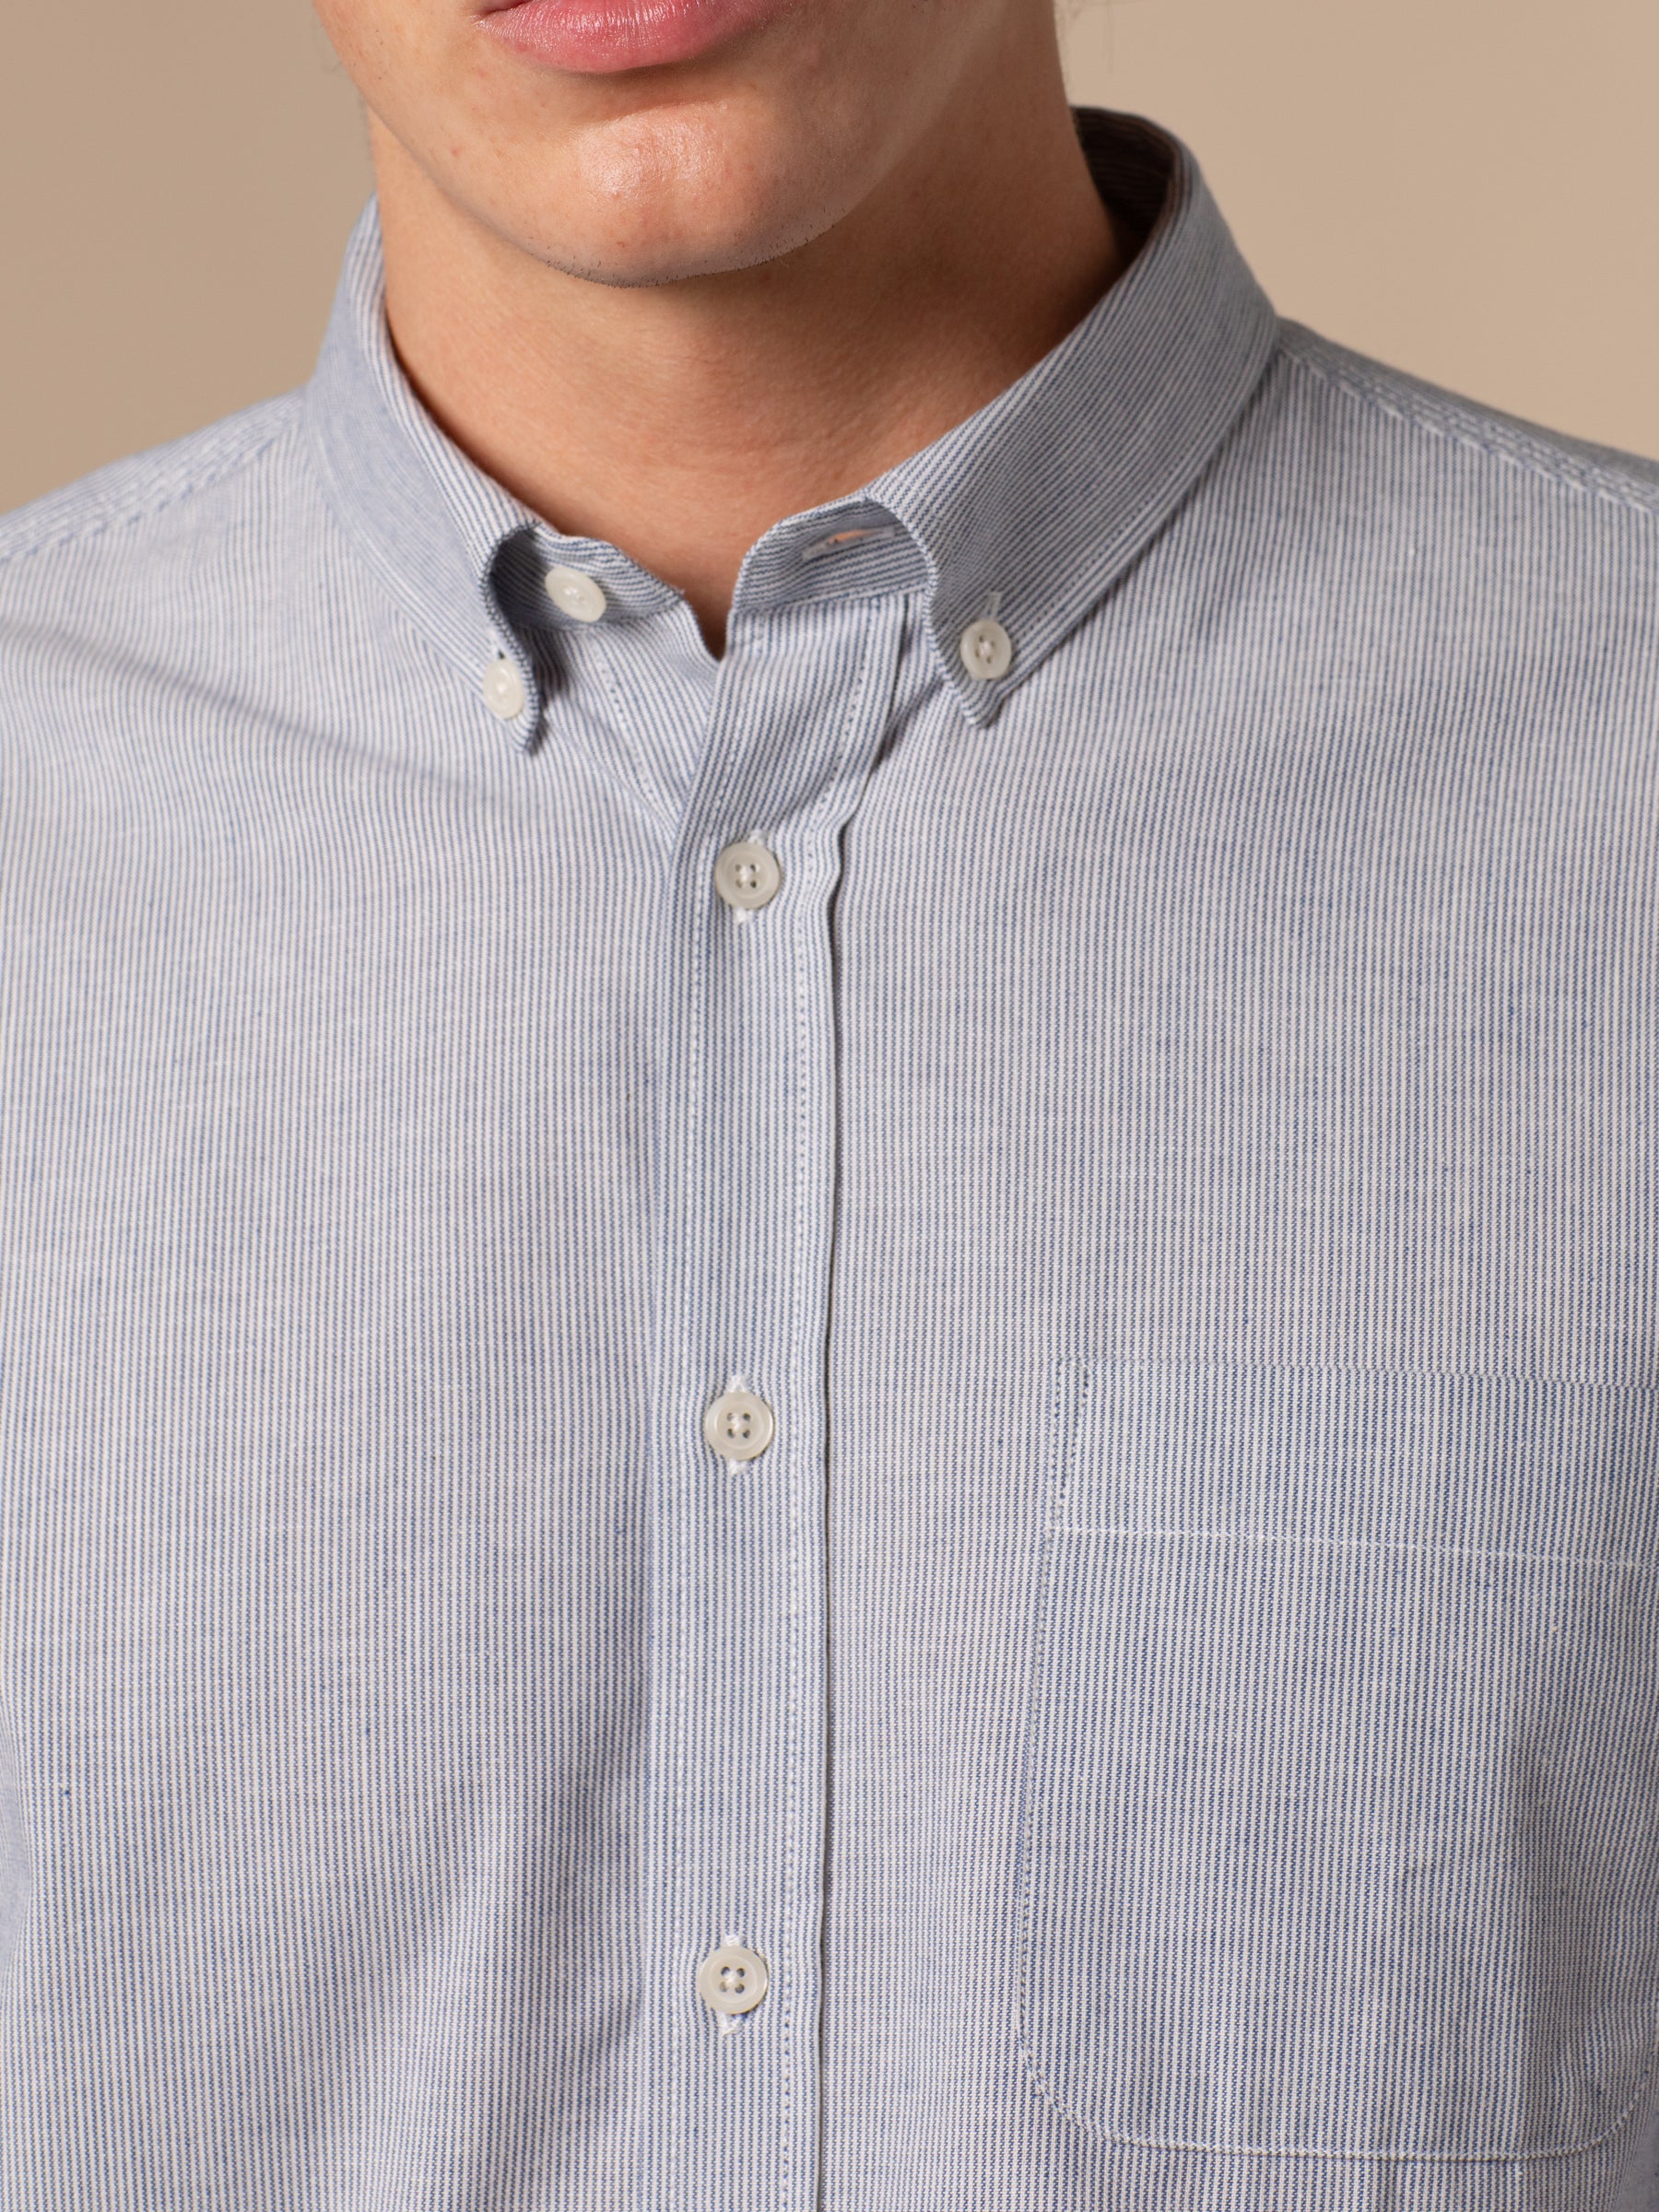 The buttoned collar from the Raeburn Shirt, by British brand KESTIN.